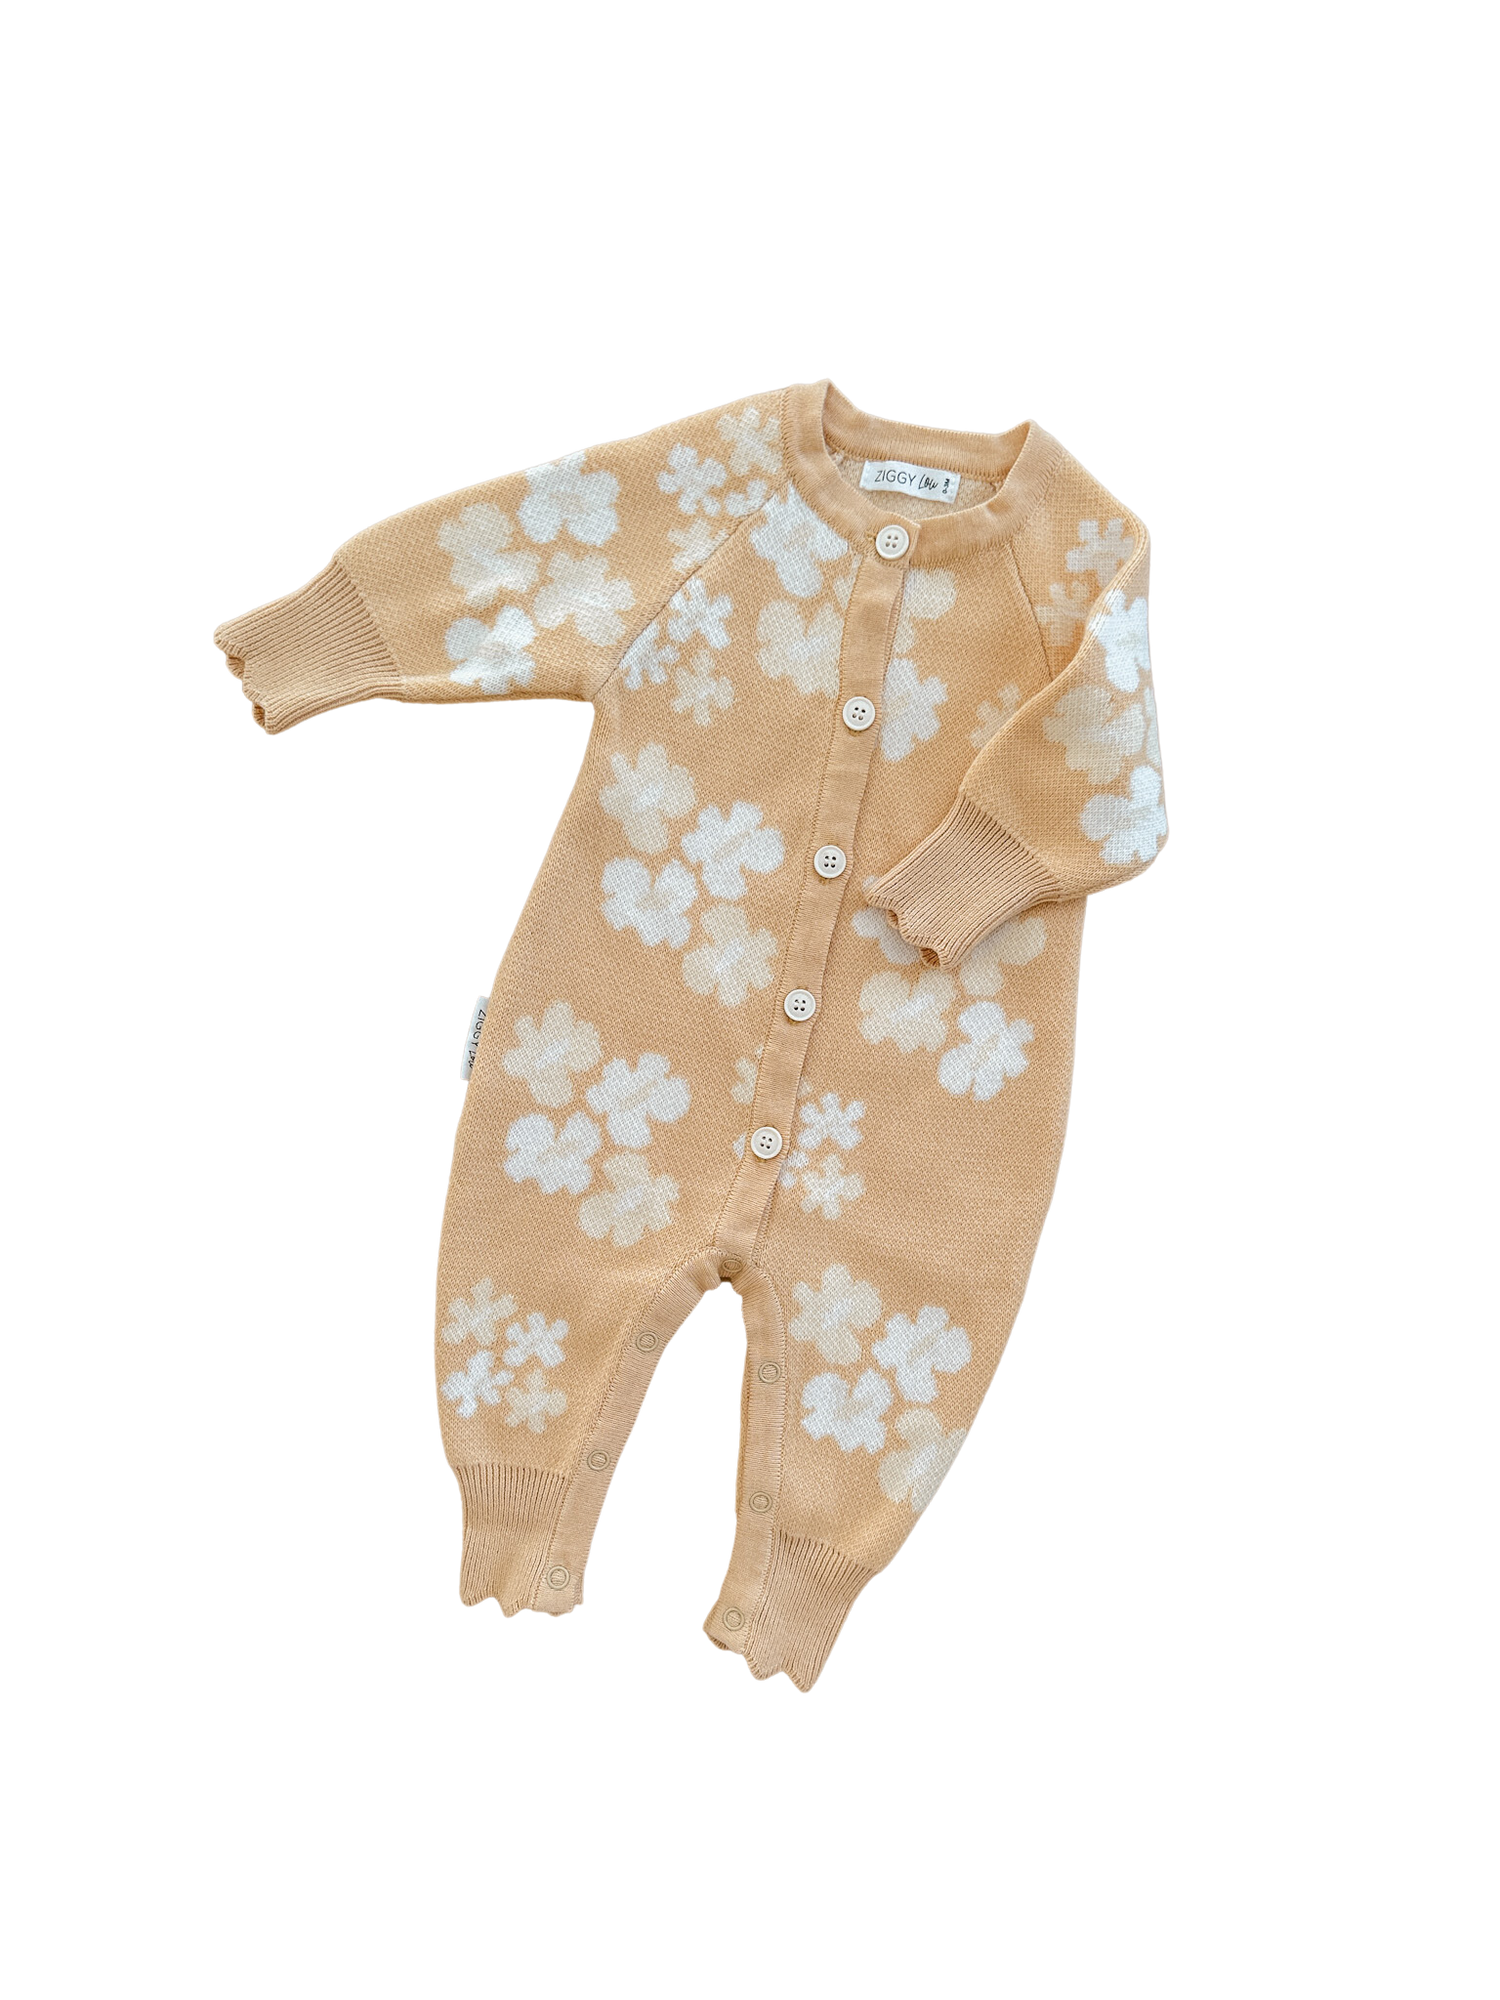 By Ziggy Lou - 100% cotton baby clothing. Featuring classic knit romper poppy.